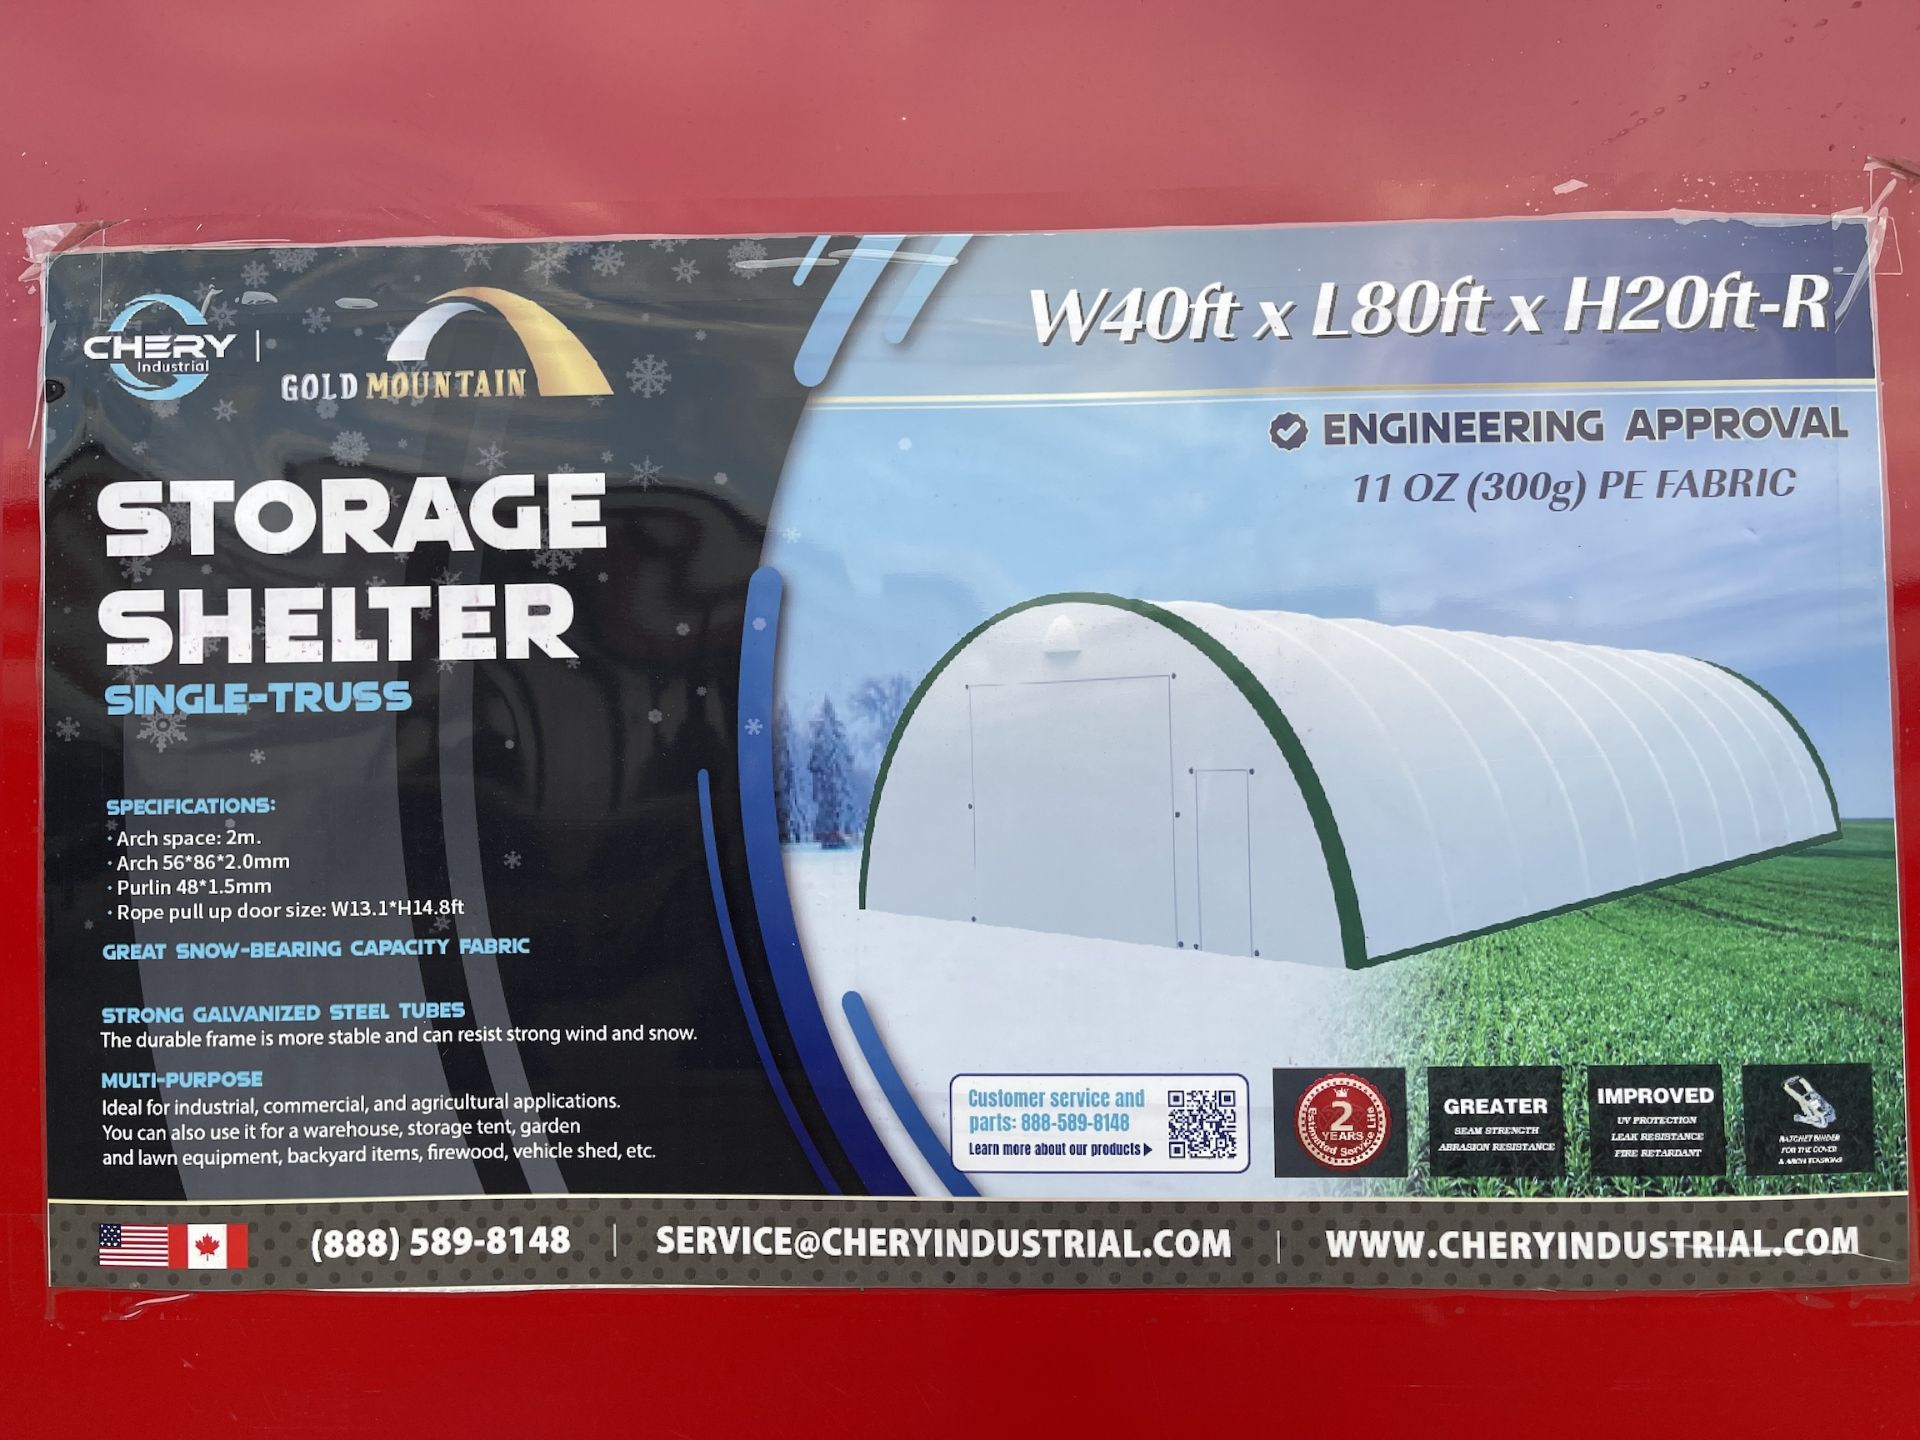 Brand New Gold Mountain 40ft X 80ft X 20ft Storage Shelter (NY186) - Image 2 of 7